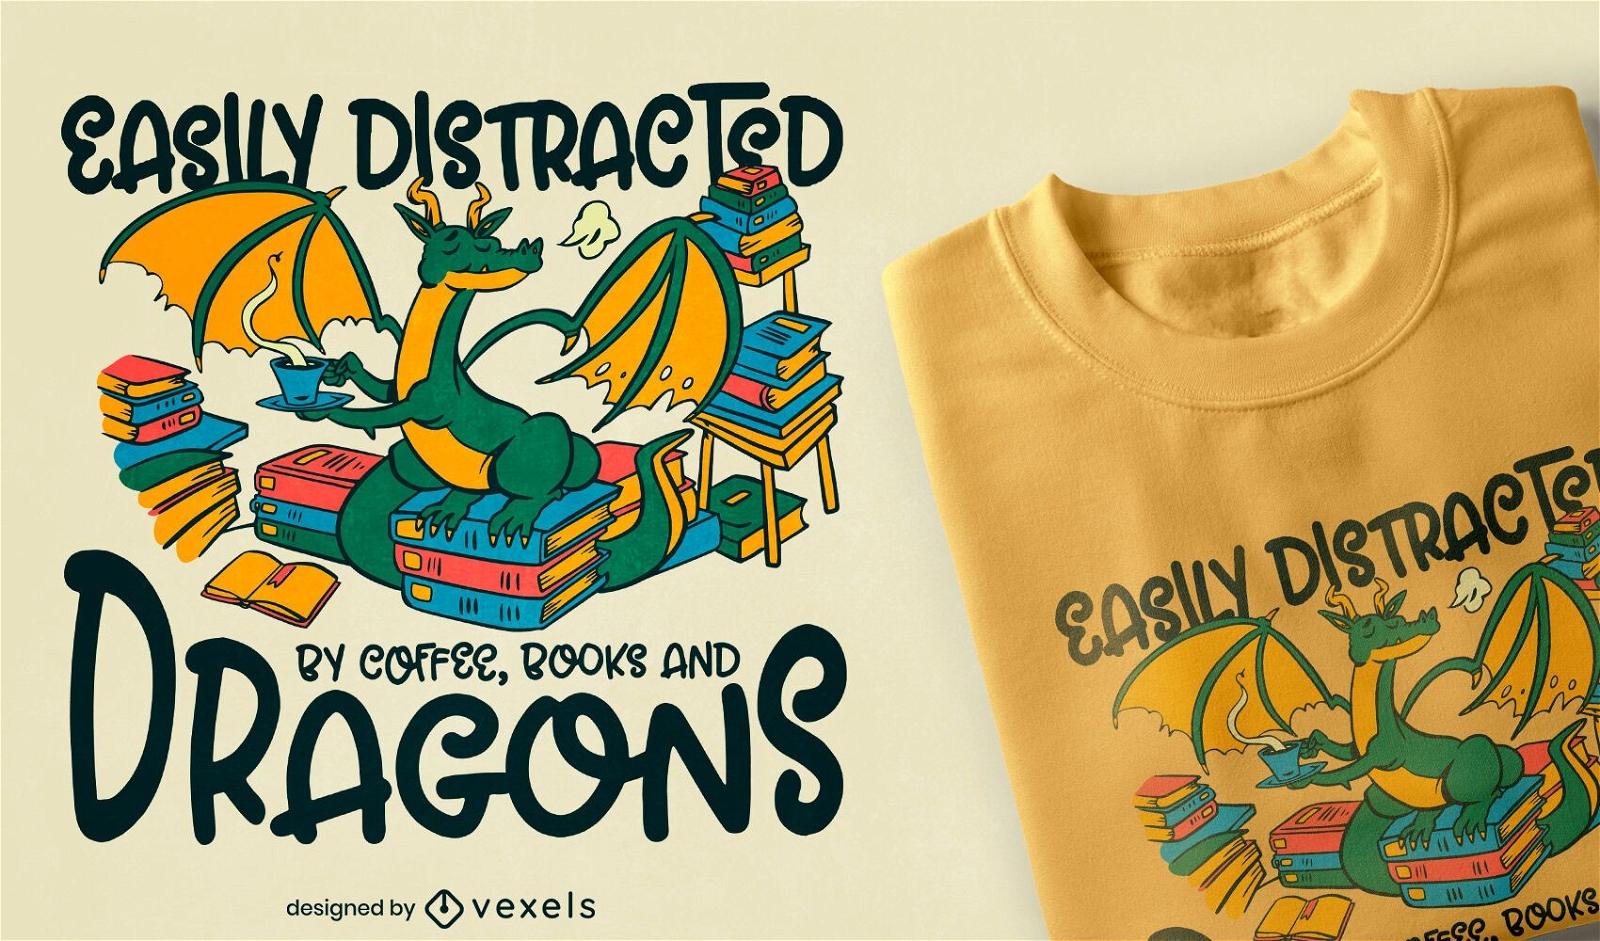 Dragons books and coffee t-shirt design